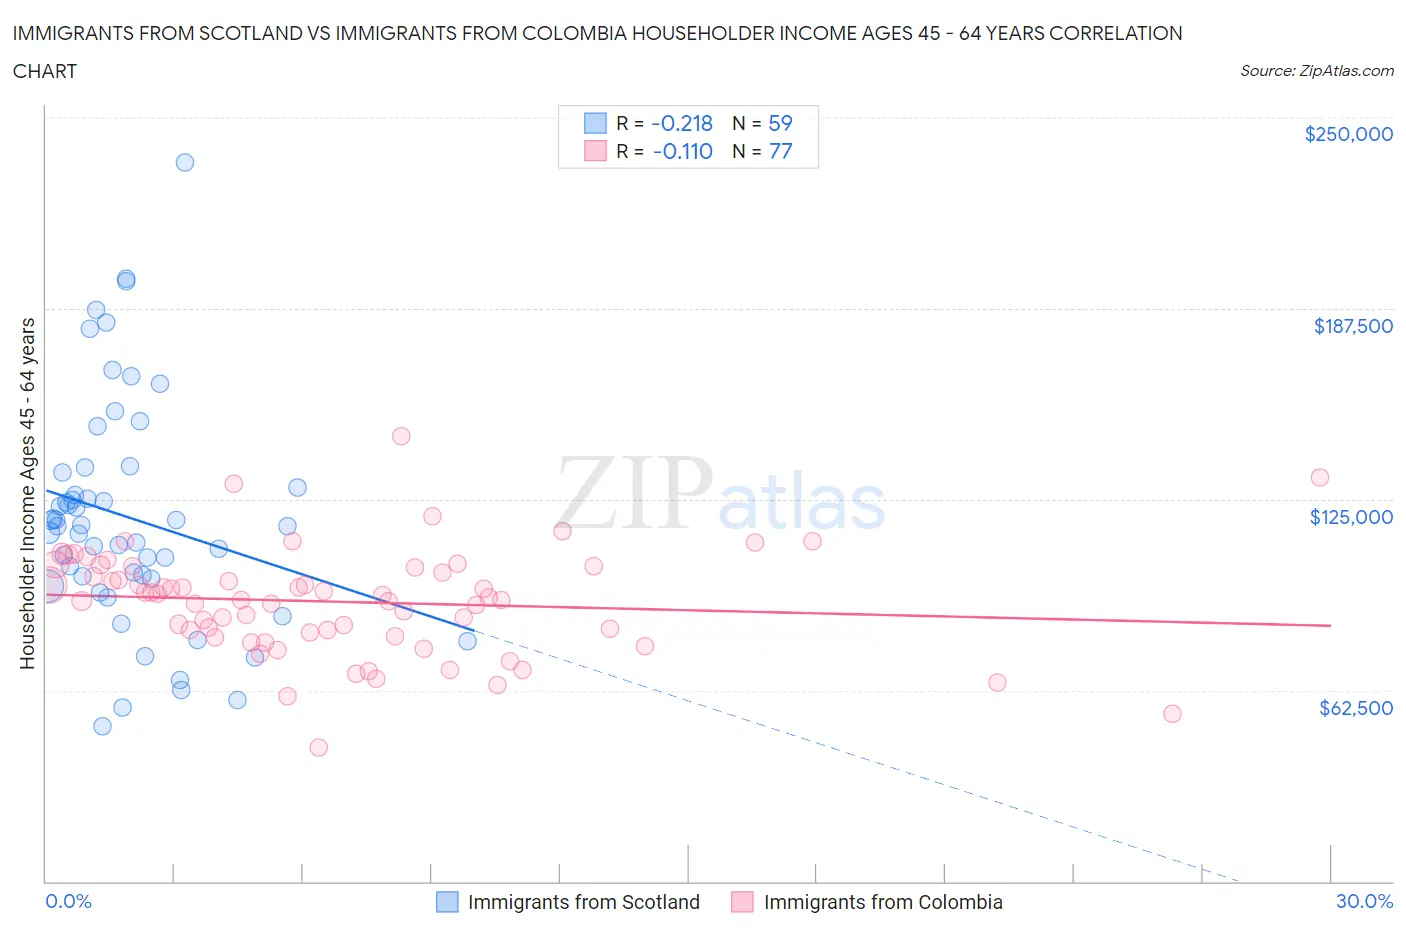 Immigrants from Scotland vs Immigrants from Colombia Householder Income Ages 45 - 64 years